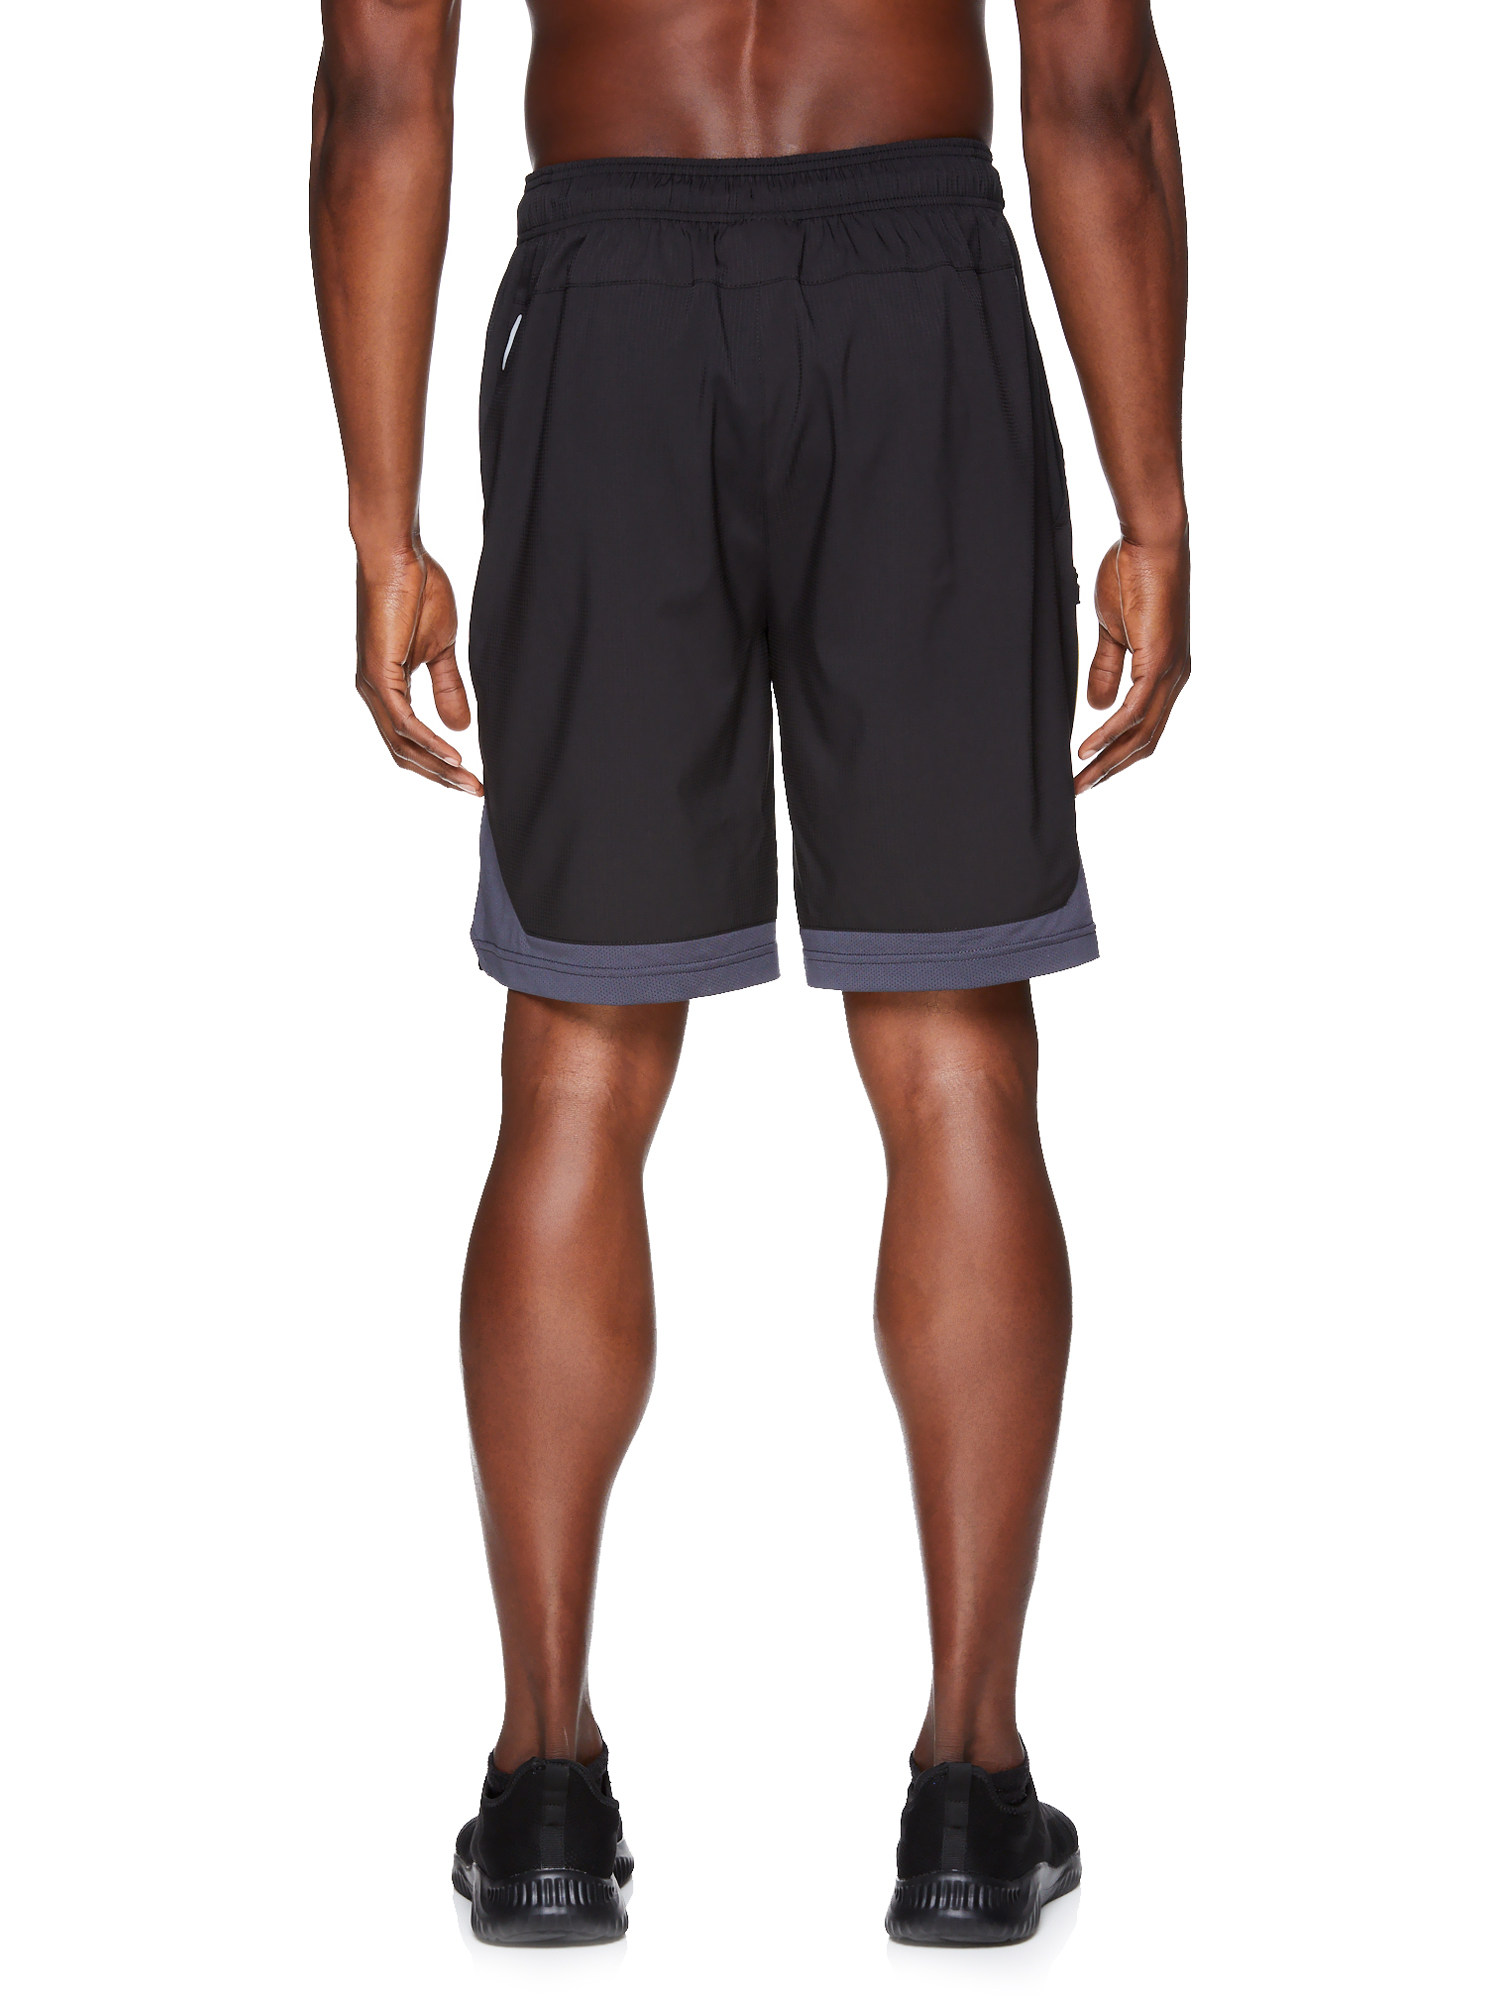 Reebok Men's and Big Men's Active Unstoppable Woven Short, up to Size 3XL - image 2 of 4